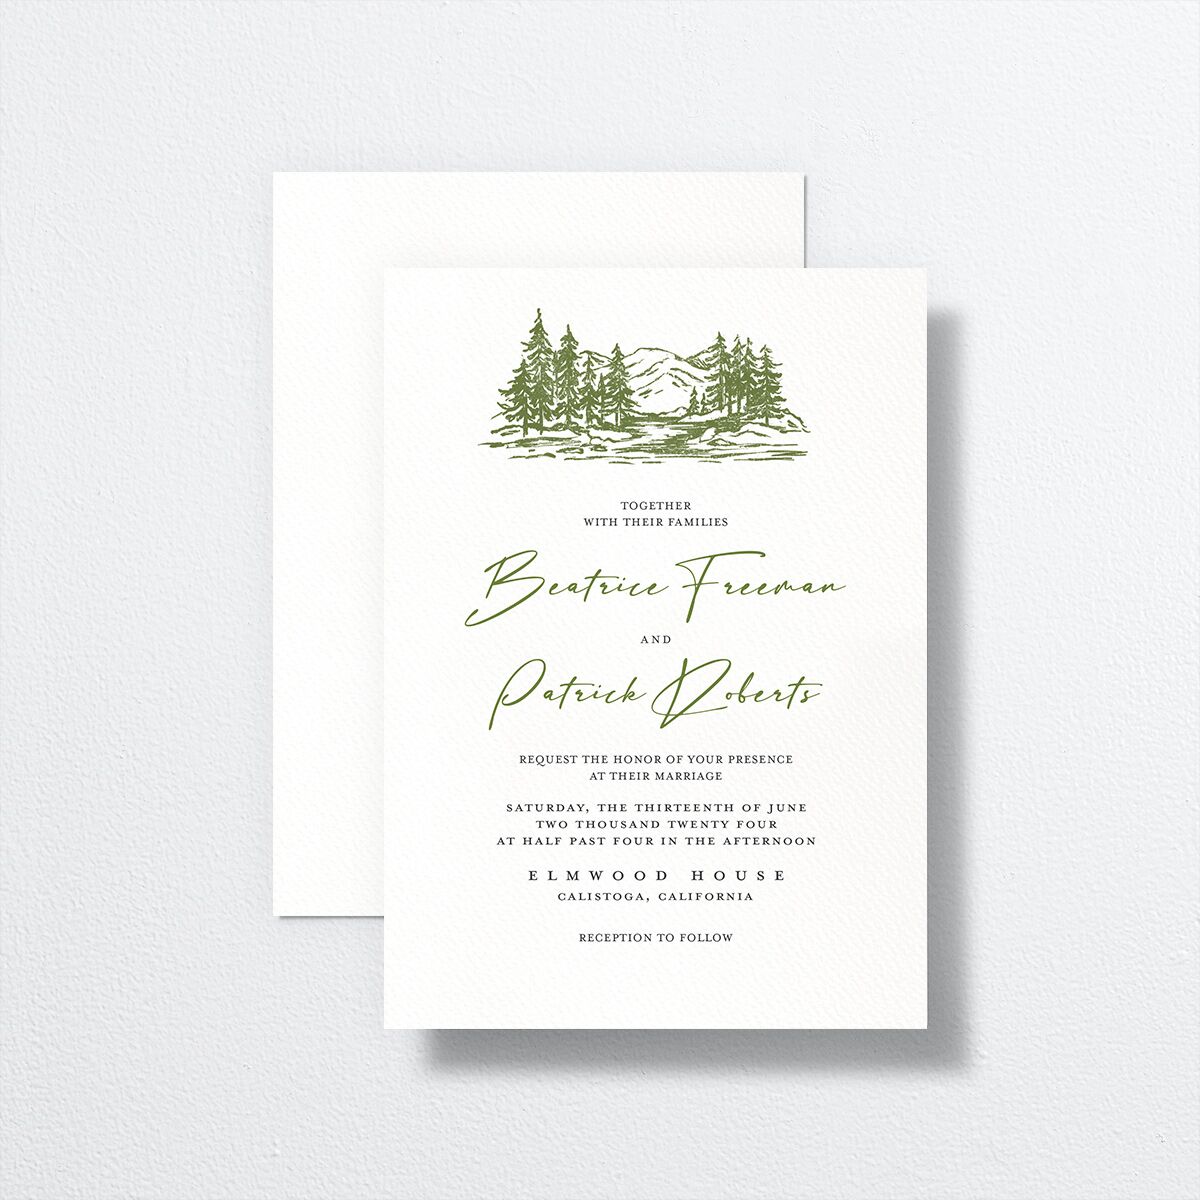 Romantic Setting Wedding Invitations front-and-back